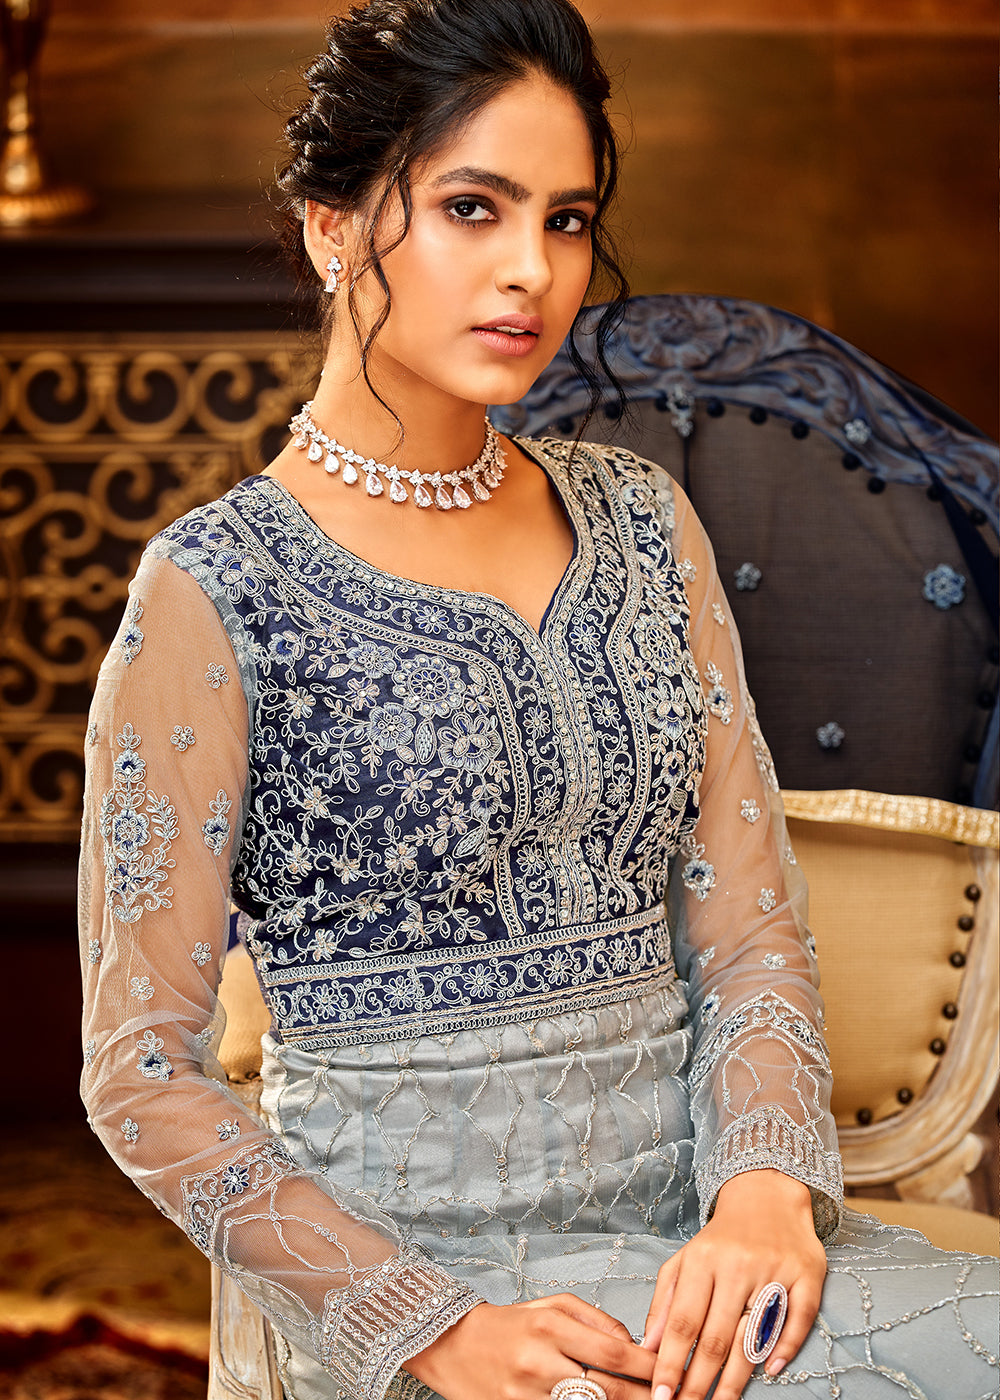 Buy Now Trendy Grey & Navy Blue Embroidered Wedding Anarkali Gown Online in USA, UK, Australia, New Zealand, Canada & Worldwide at Empress Clothing. 